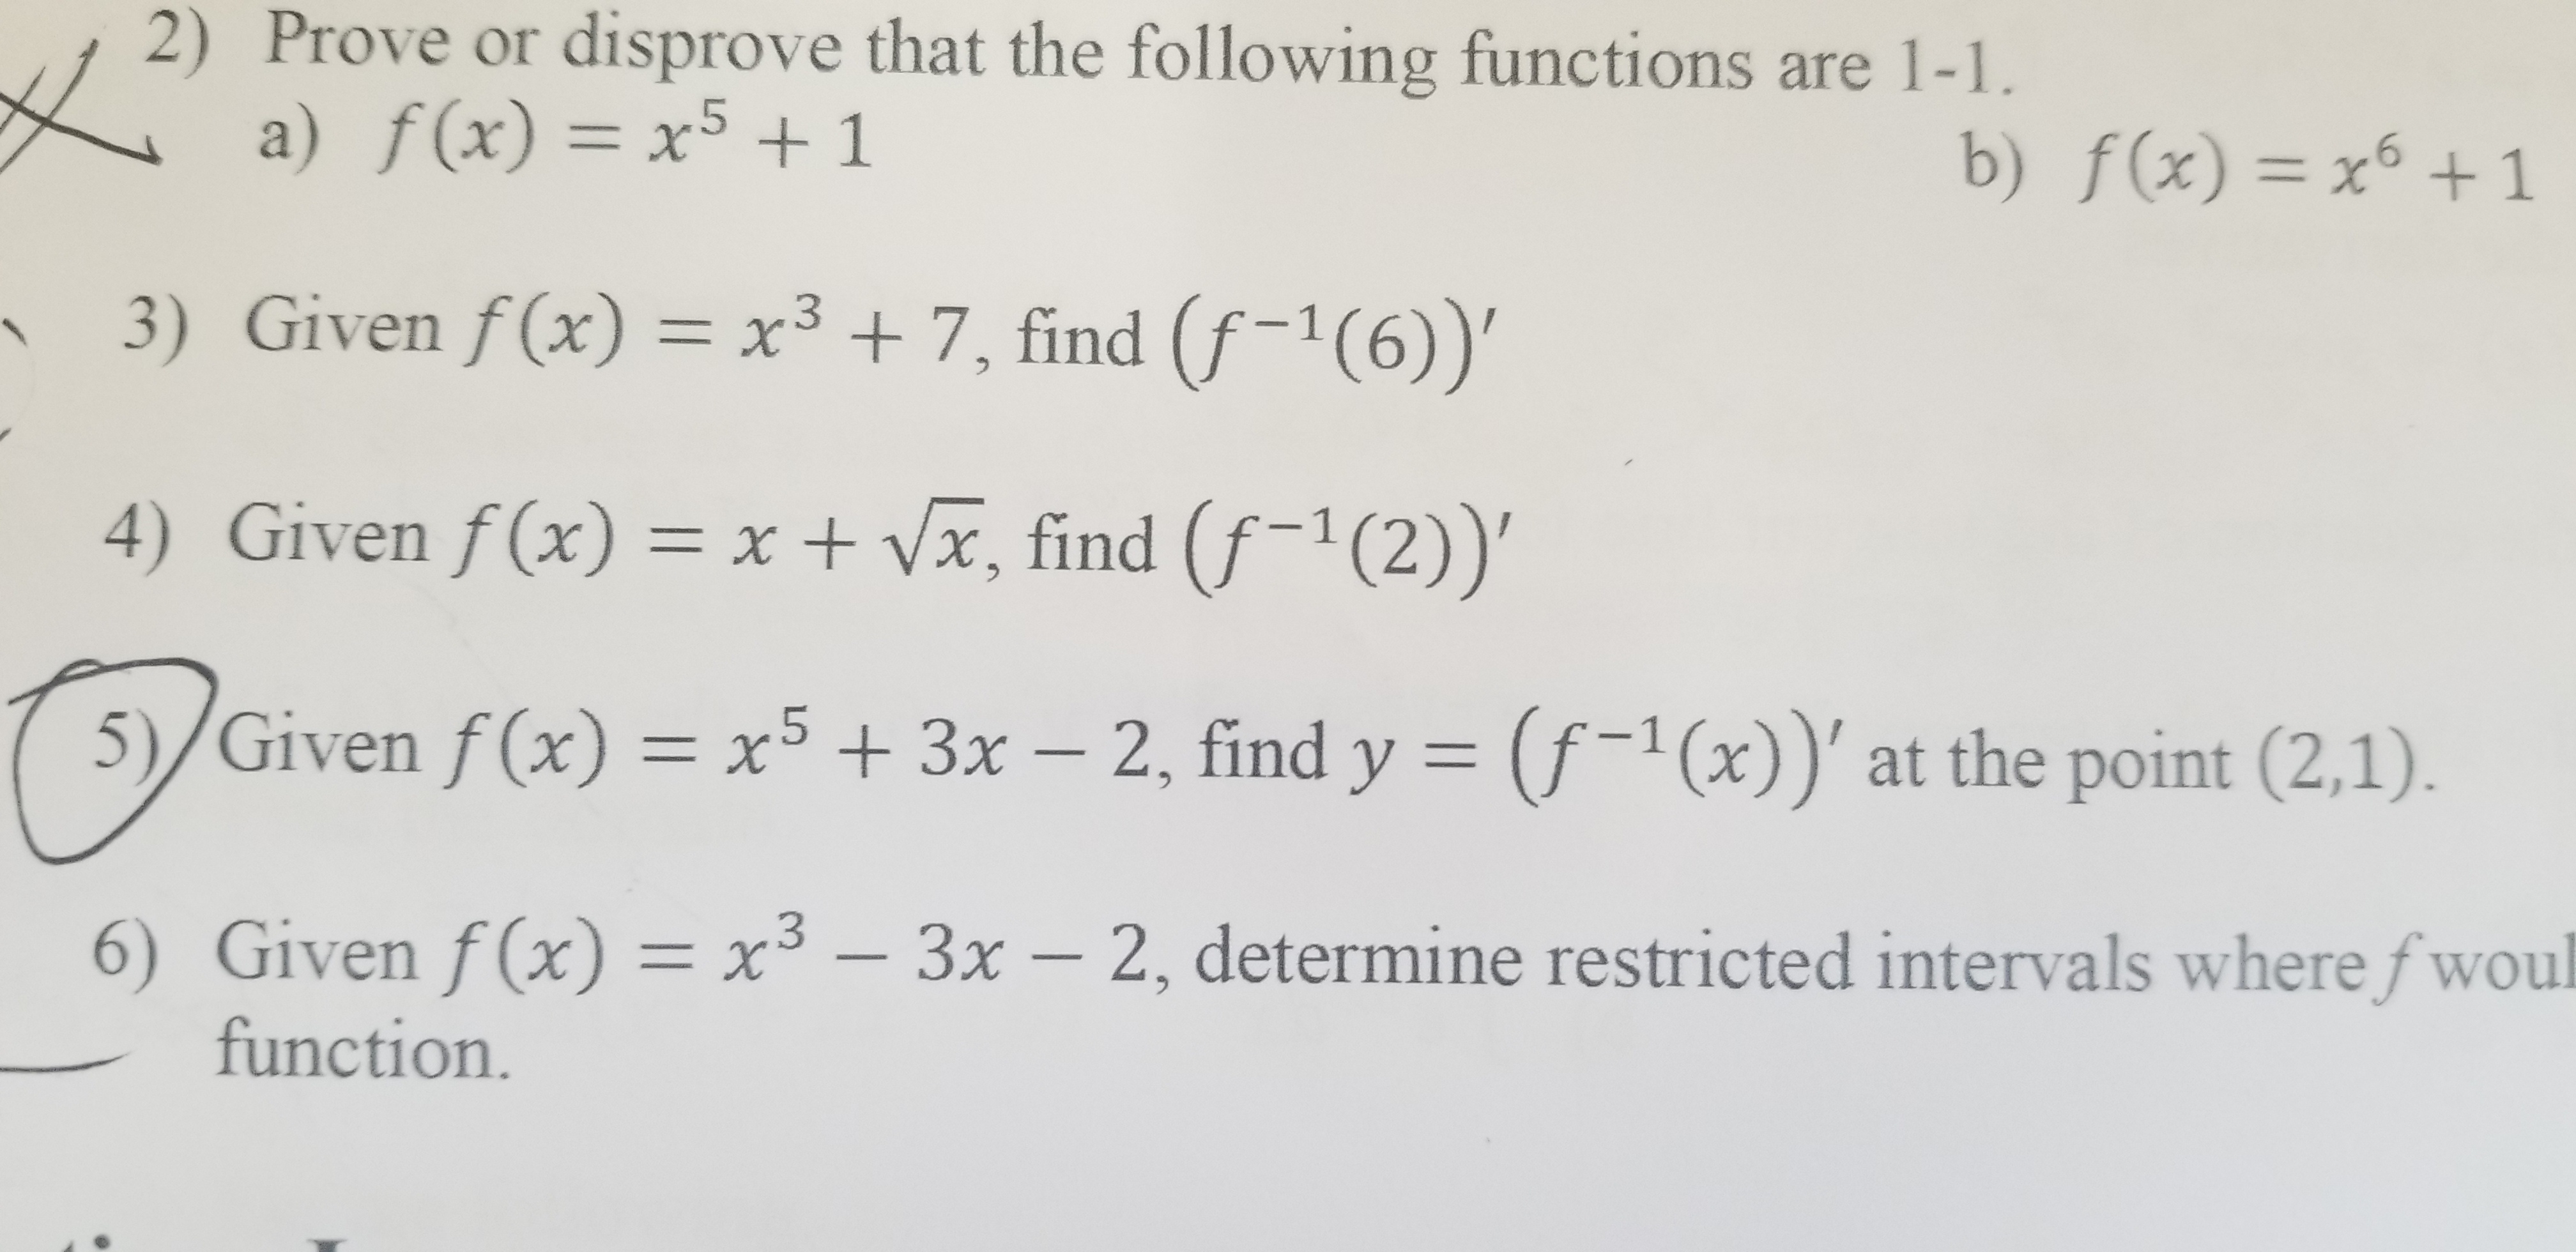 |
2) Prove or disprove that the following functions are 1-1
a) f(x) = x5 +1
b) f(x) = x1
-6
3) Given f(x) = x3 +7, find (f-1(6))'
4) Given f(x) = x + Vx, find (f-1 (2))'
5)/Given f(x) = x5 + 3x - 2, find y (f-1(x))' at the point (2,1).
6) Given f(x) = x3 -
3x- 2, determine restricted intervals where fwoul
function.
